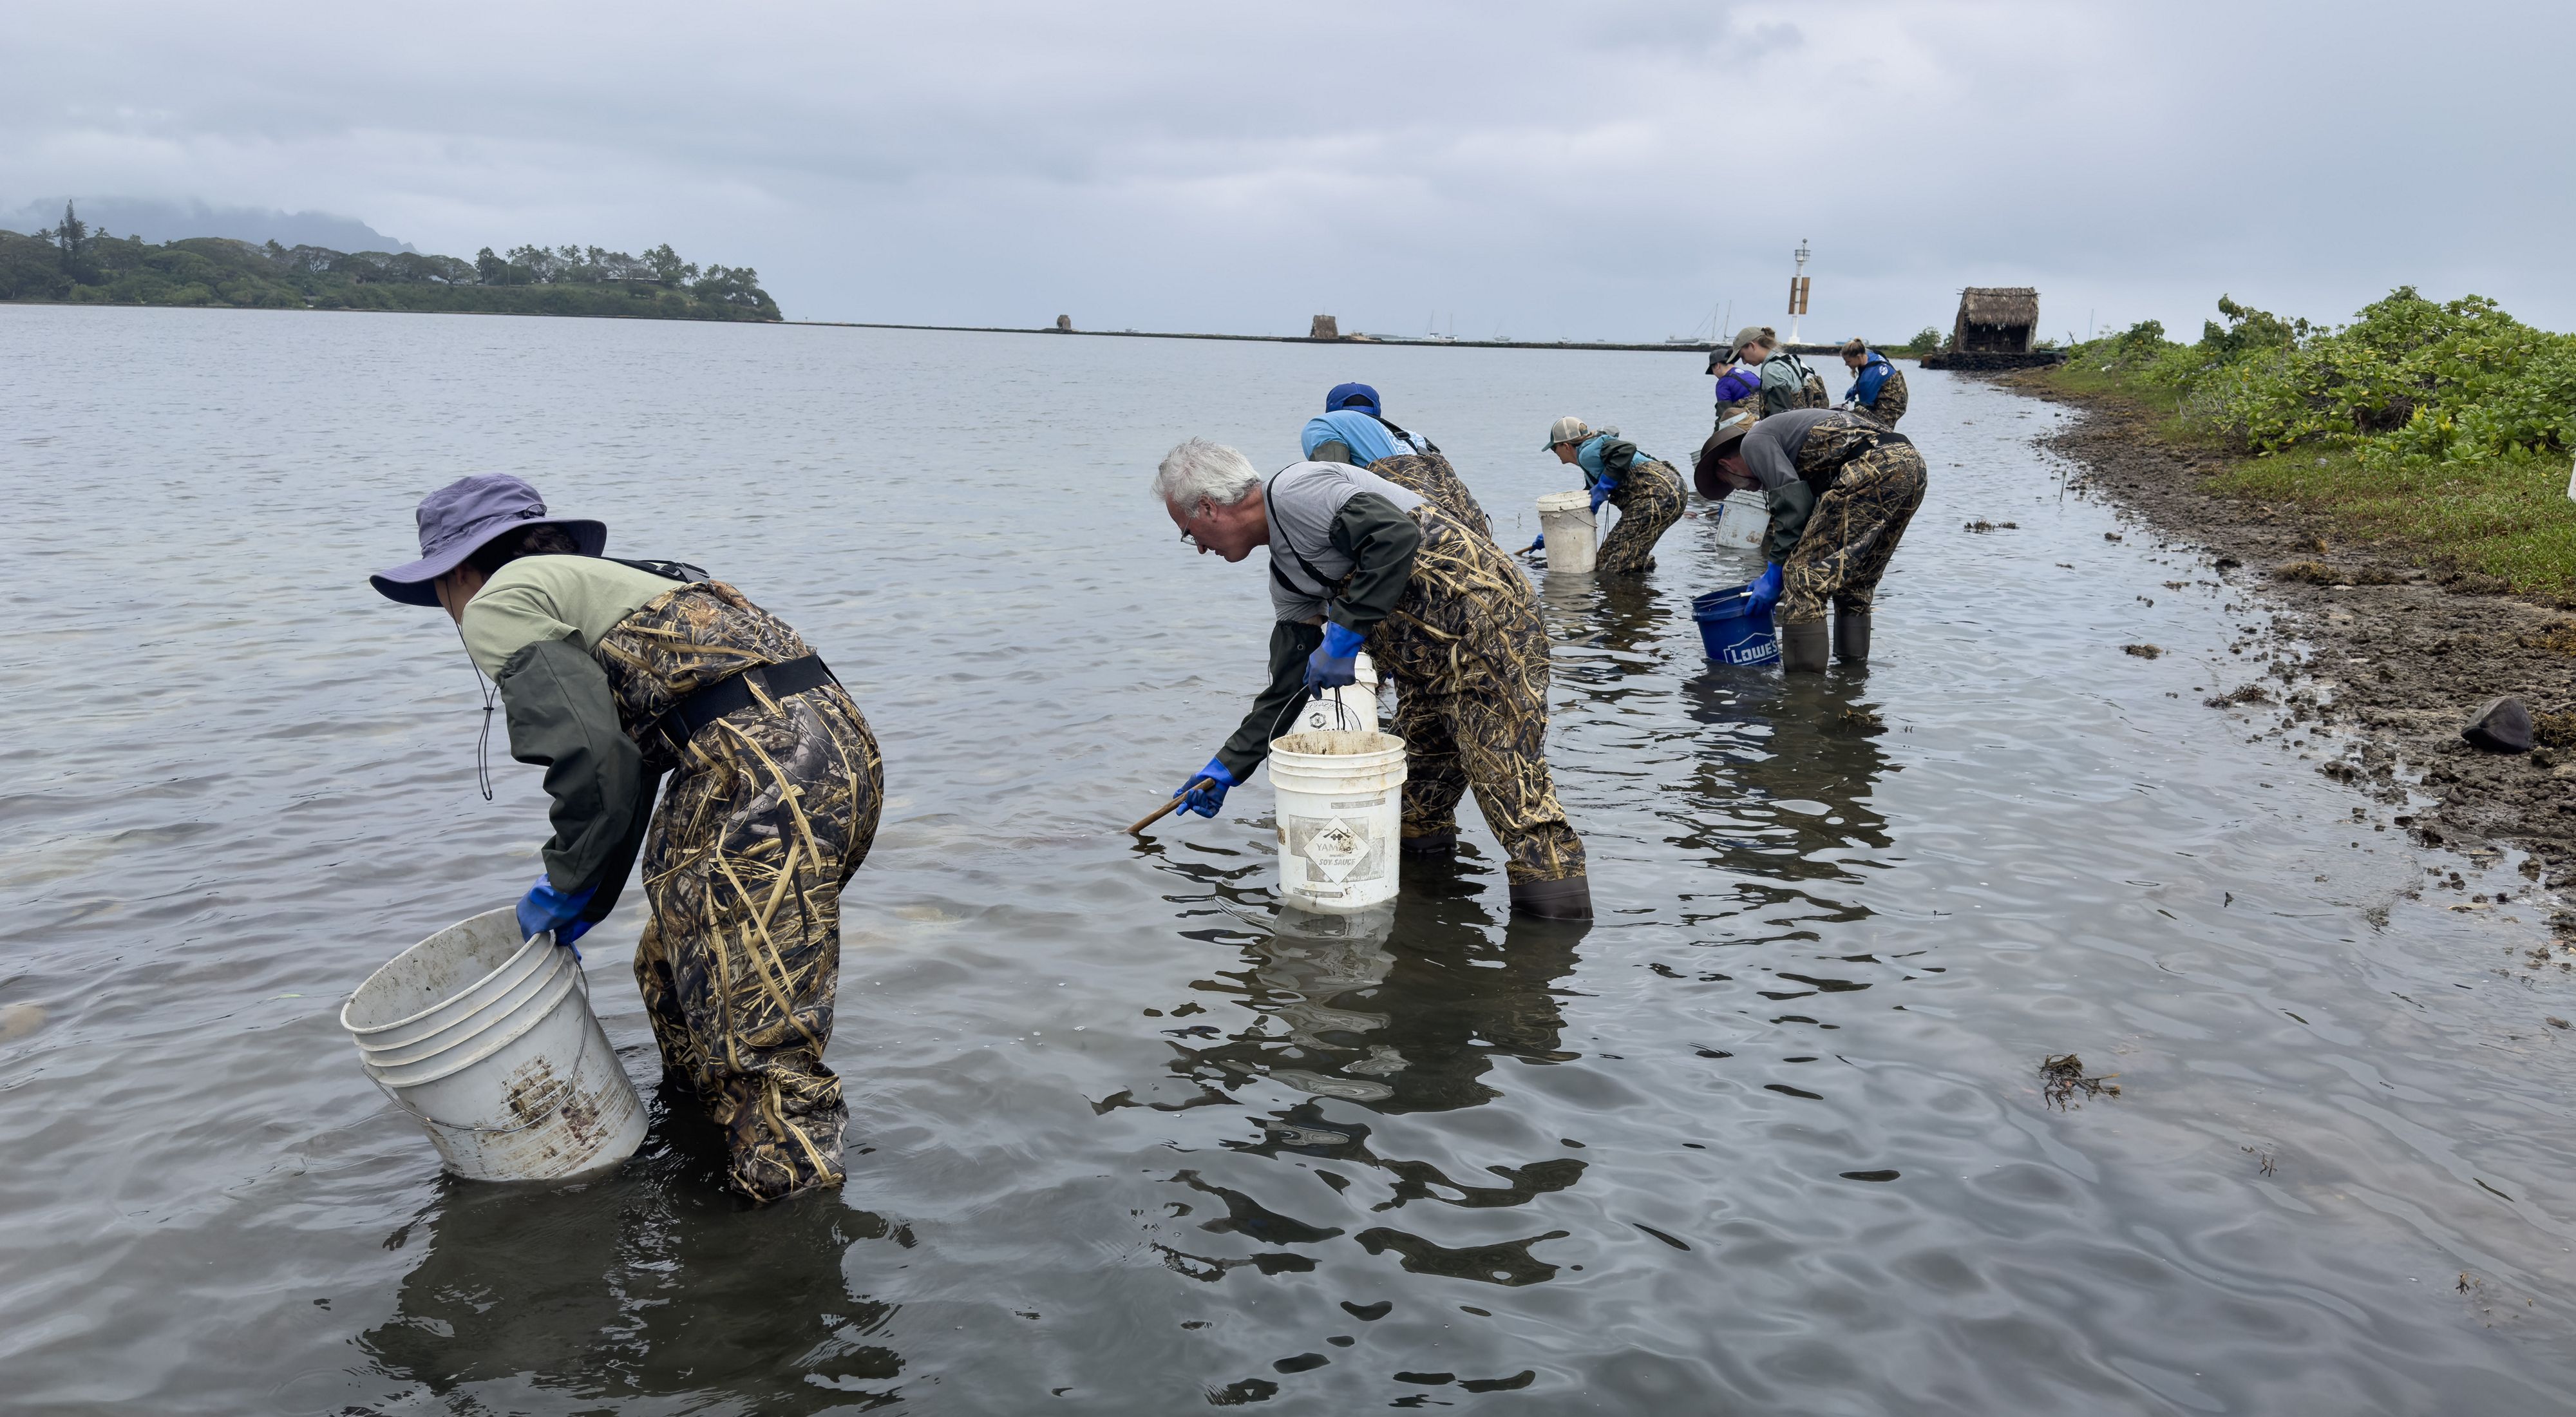 Several adults in camouflage waders stand ankle-deep in water and use long-handled nets to remove jellyfish from the water and place them in white buckets.